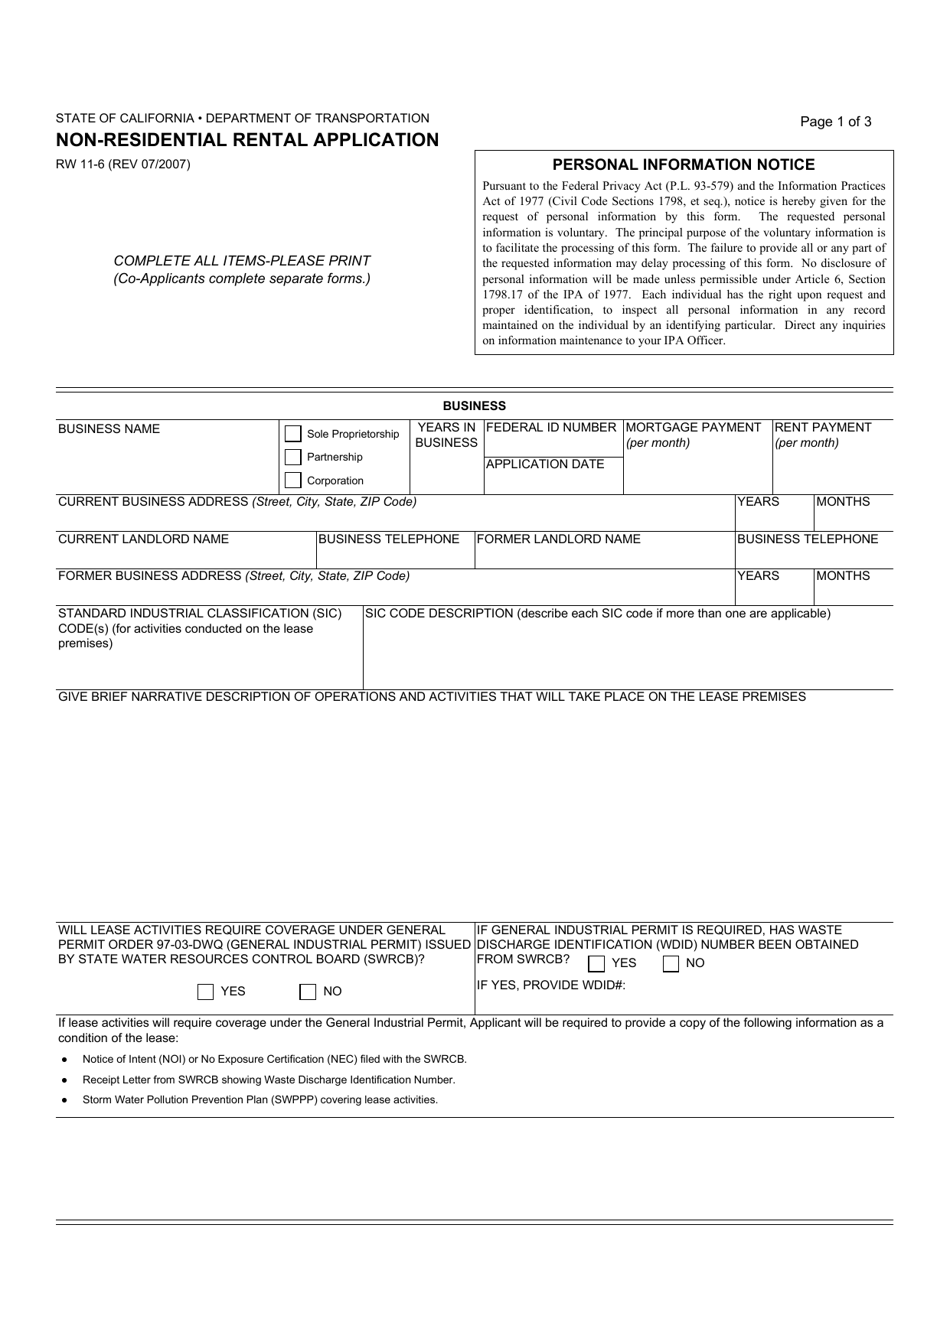 Form RW11-6 Non-residential Rental Application - California, Page 1